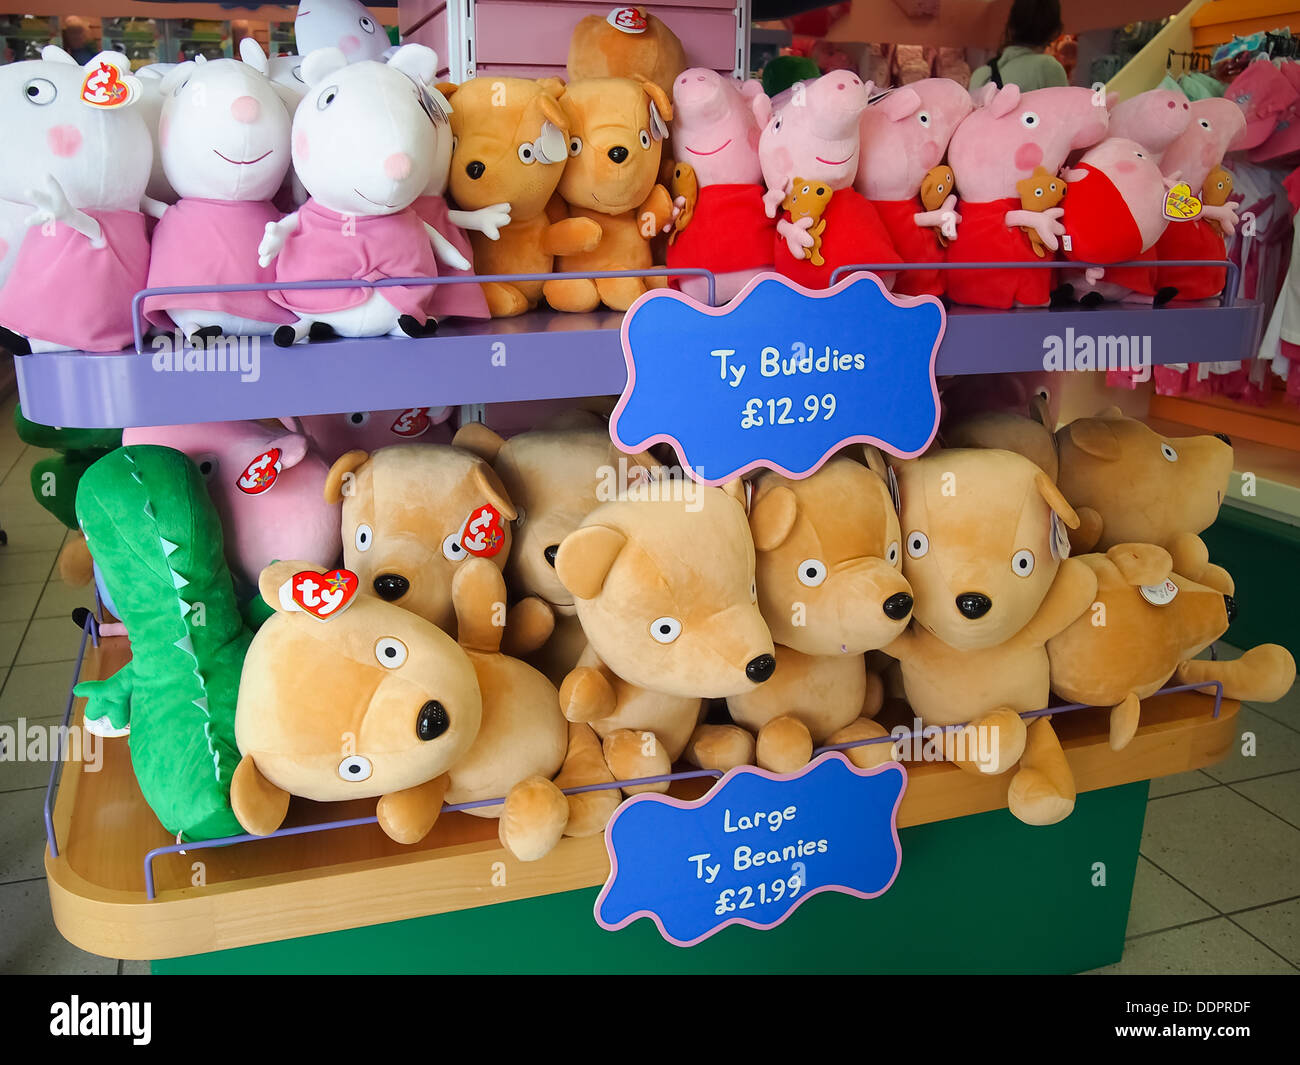 Peppa pig merchandise on sale at Peppa pig world in Paultons Park, Hampshire Stock Photo